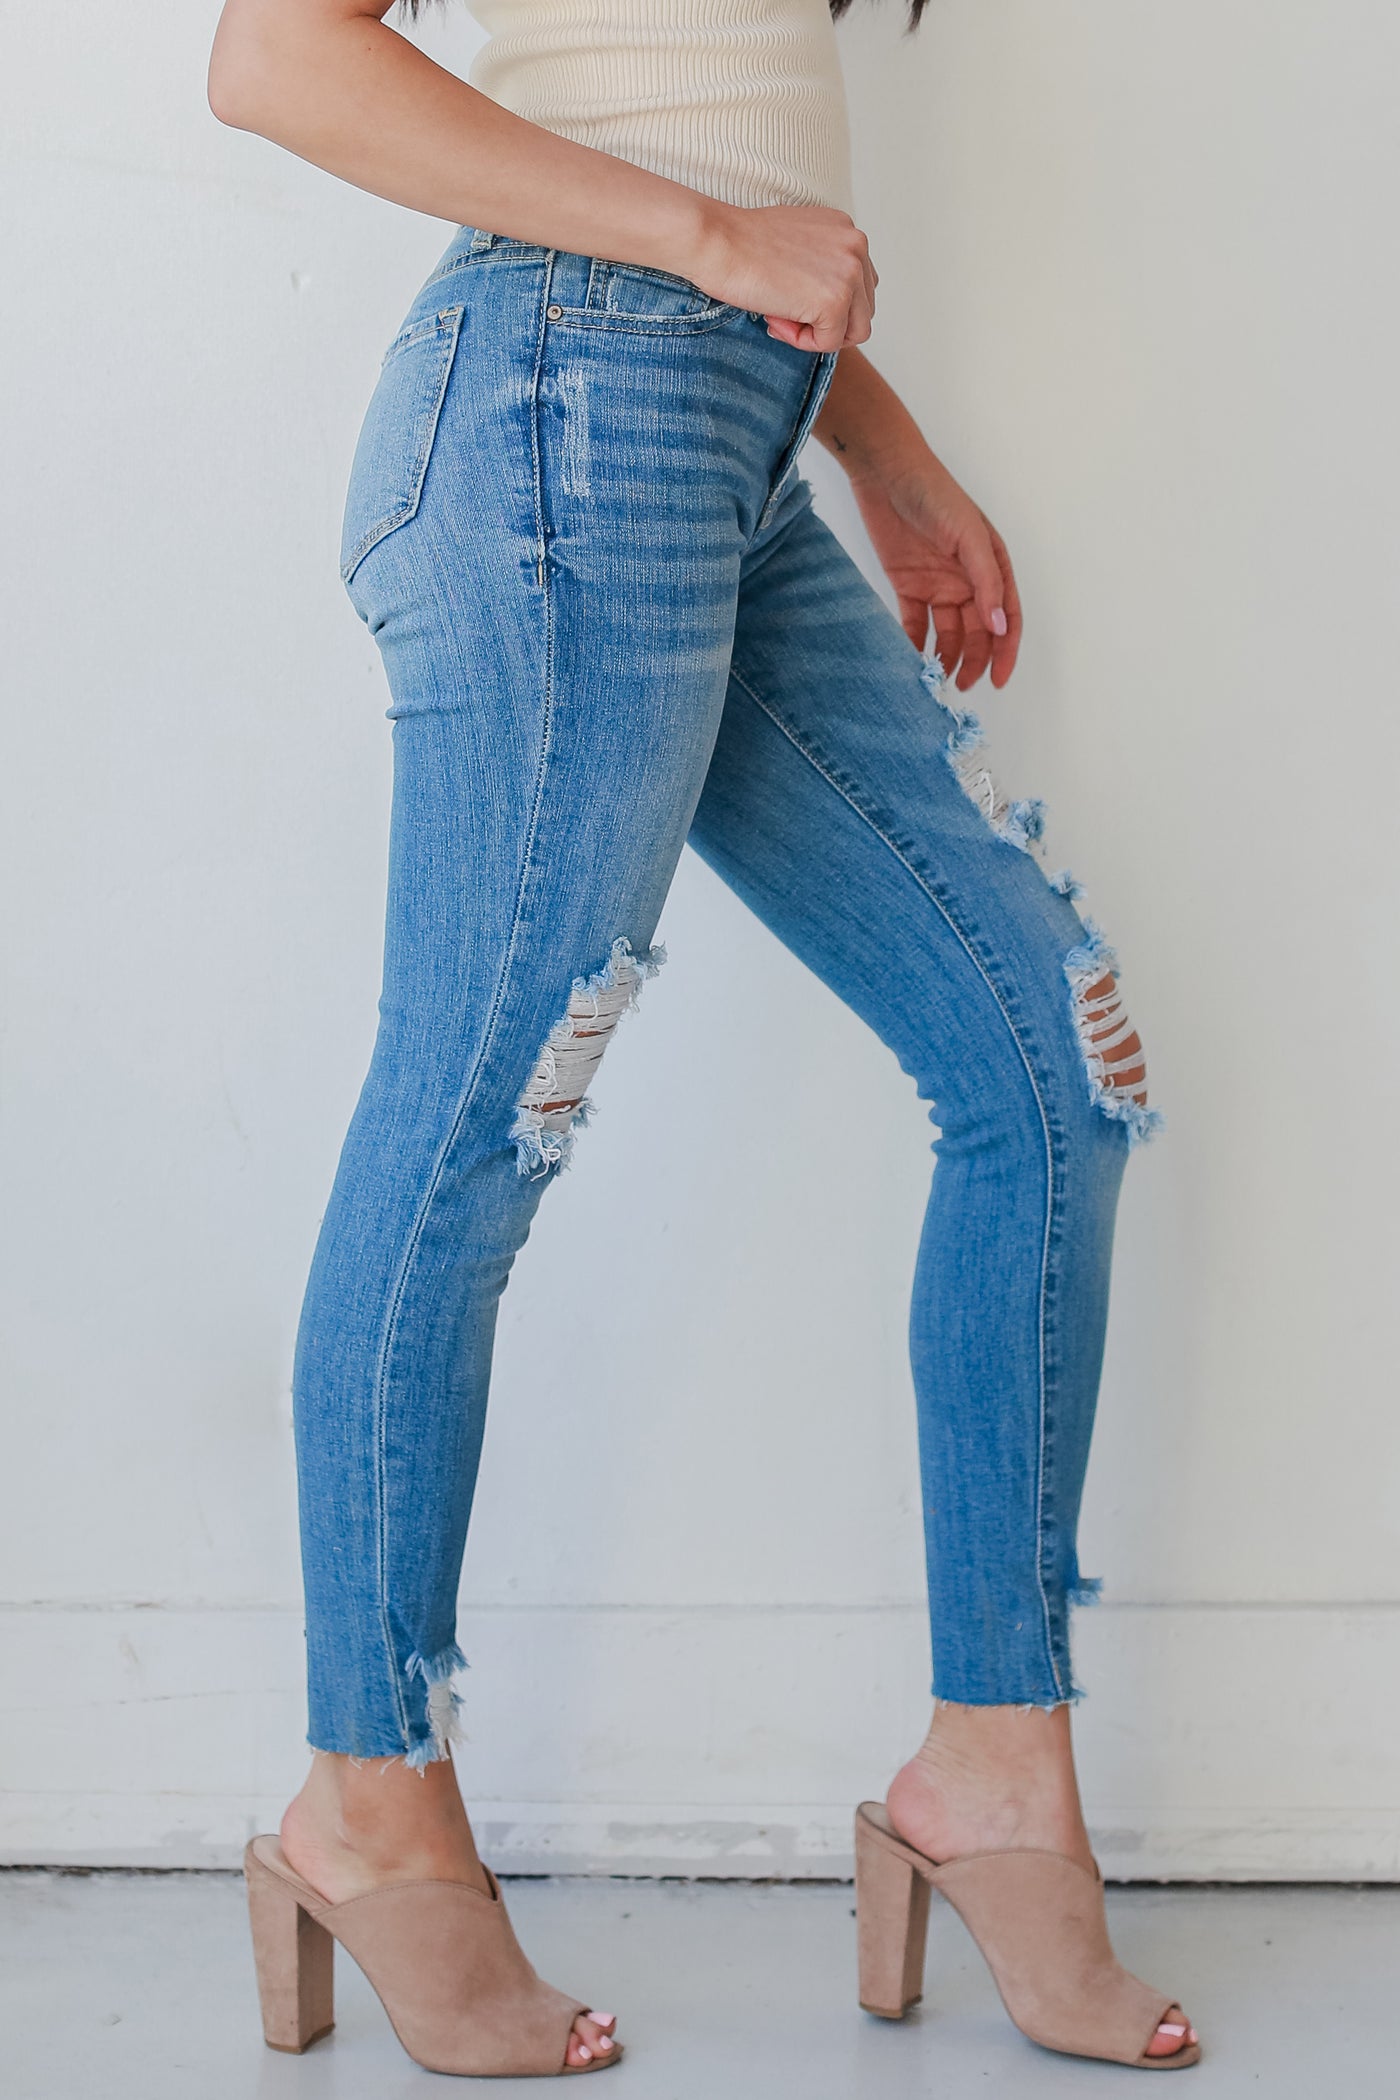 Distressed Skinny Jeans side view